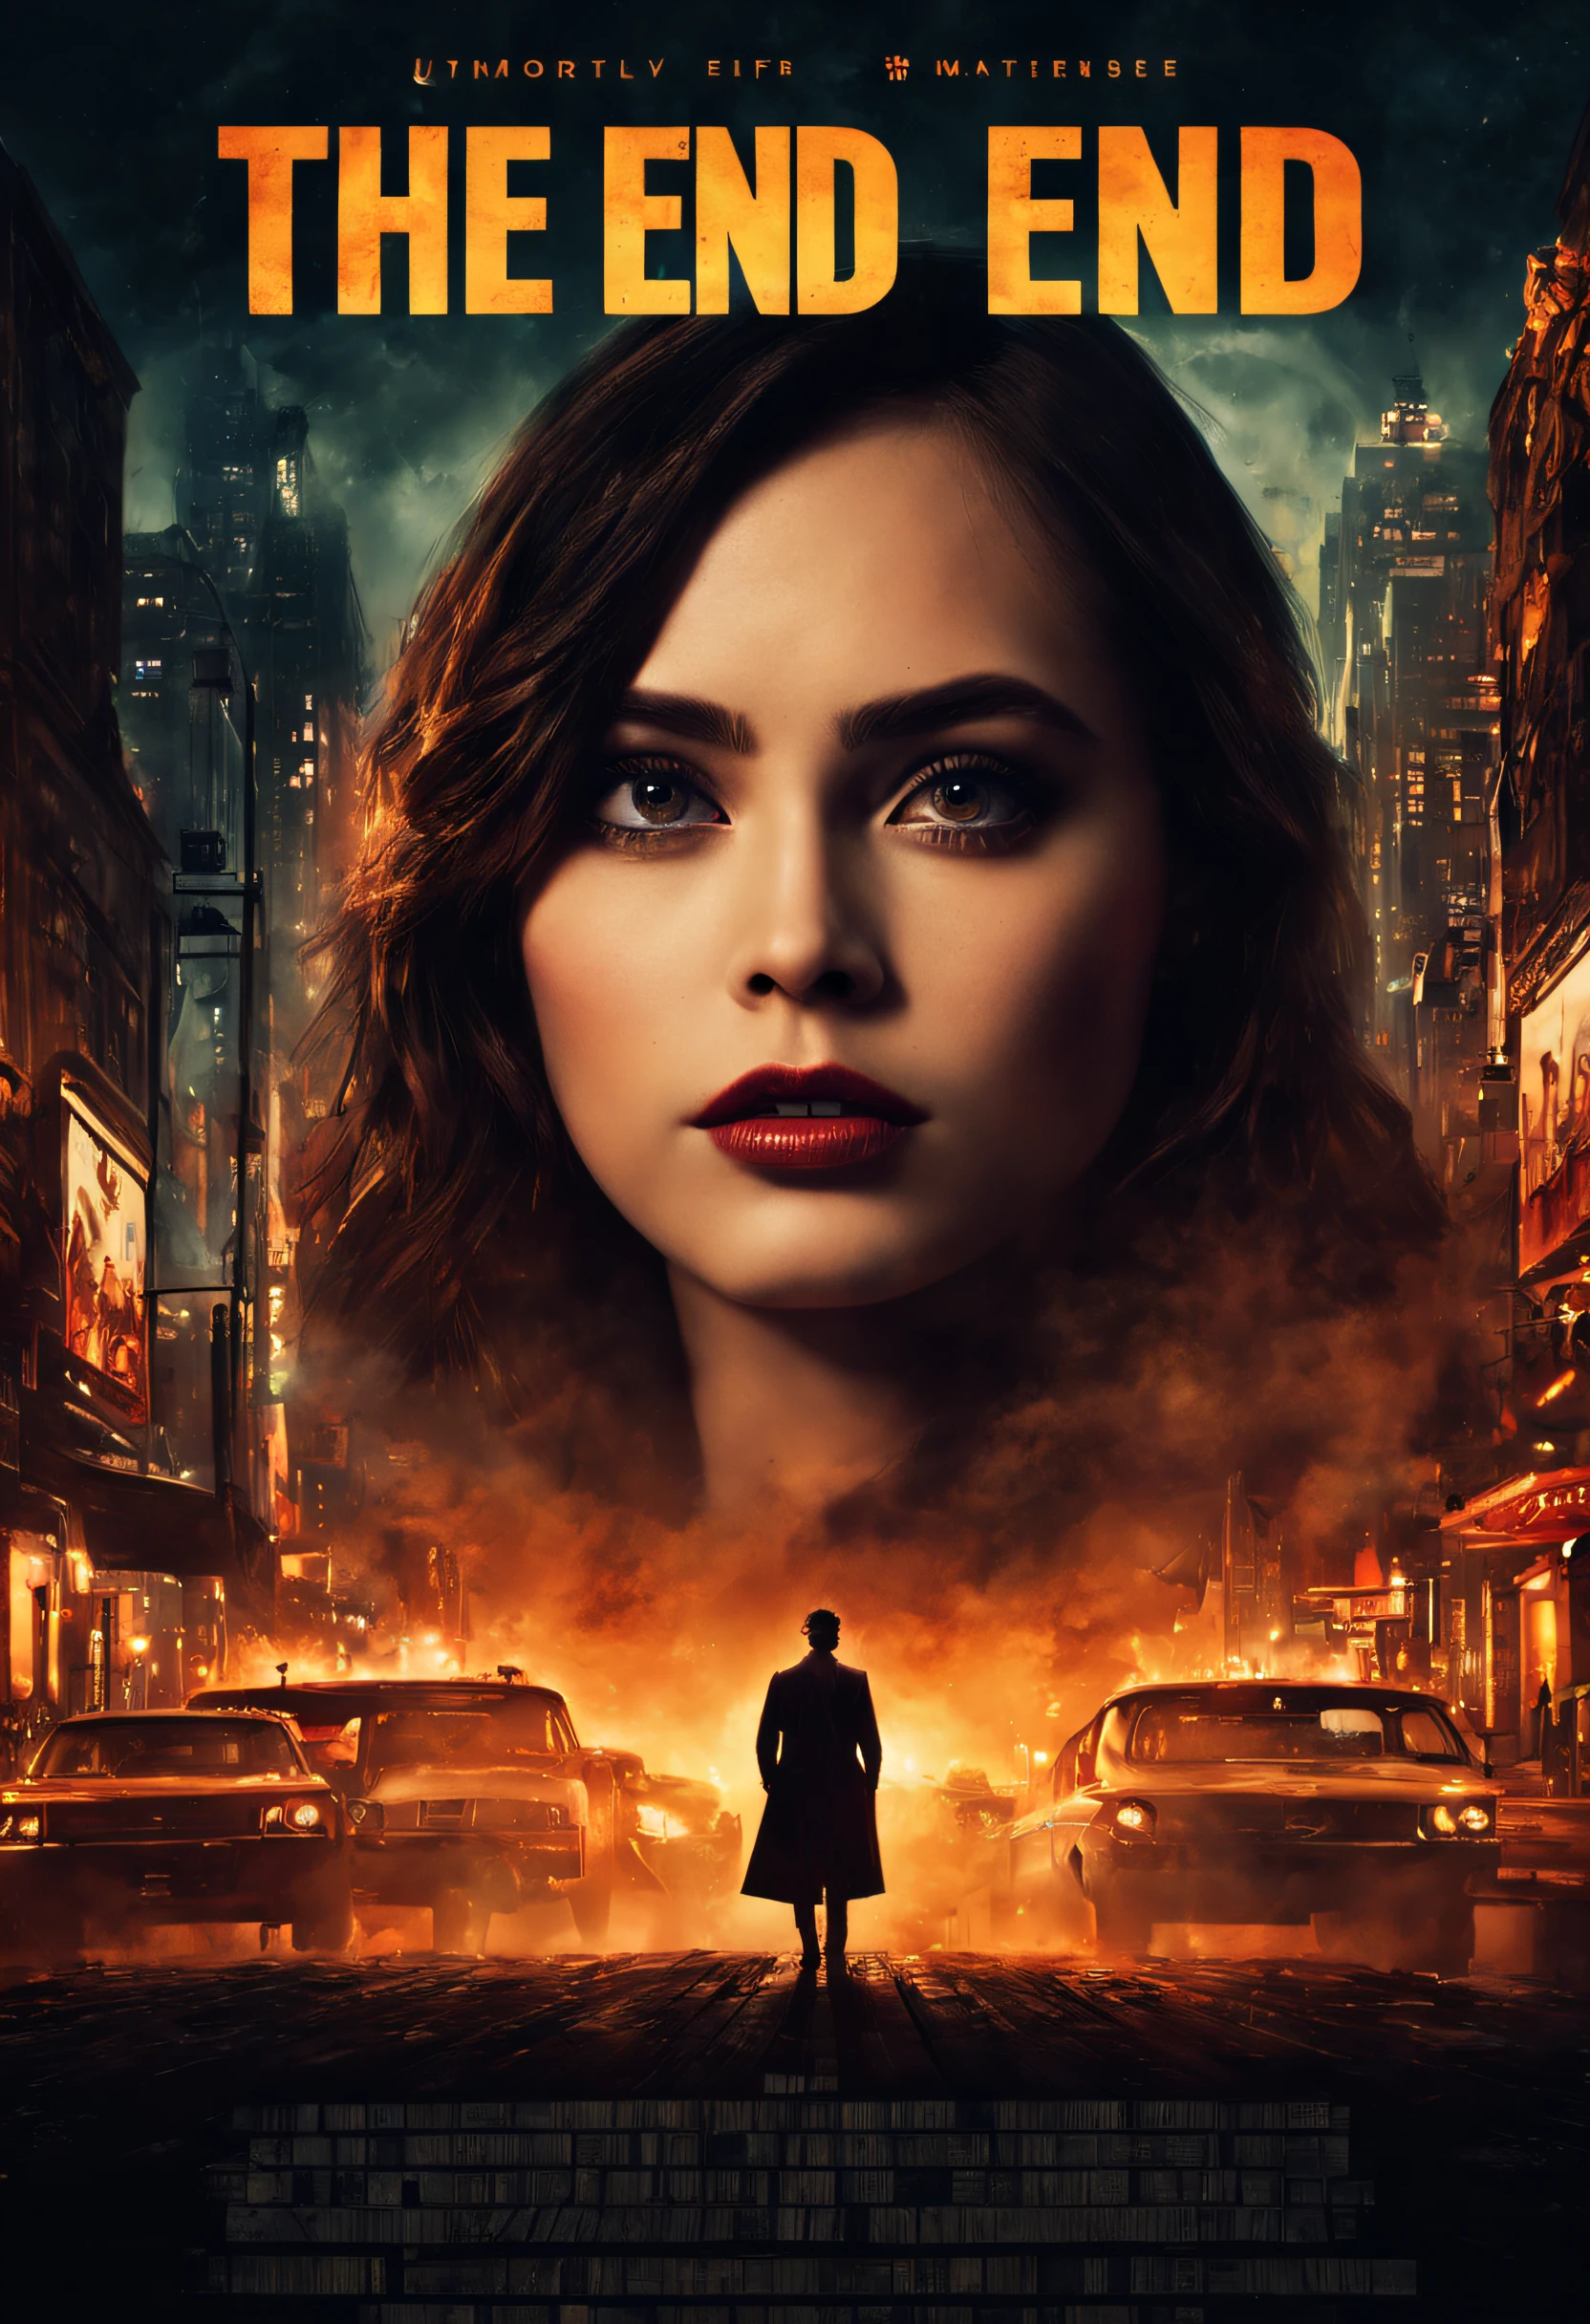 poster of the movie The End, title, and credits, highres, ultra-detailed, vivid colors, dramatic lighting, realistic, portraits, bokeh, cinematic, creative design, intense atmosphere, dark background, suspenseful, shadowy figures, melancholic tone, prominent typography, artistic composition, dynamic angles, contrasting colors, depth of field, striking visual effects, powerful emotions, haunting imagery, captivating visuals, atmospheric setting, theatrical, mysterious ambiance, skilled craftsmanship, authentic characters, intriguing narrative, professional artwork, captivating storyline, enigmatic expressions, cinematic style, thought-provoking symbolism, compelling poster design, iconic visuals, masterfully executed, visually stunning, visually engaging, attention-grabbing, memorable, reminiscent of classic film posters